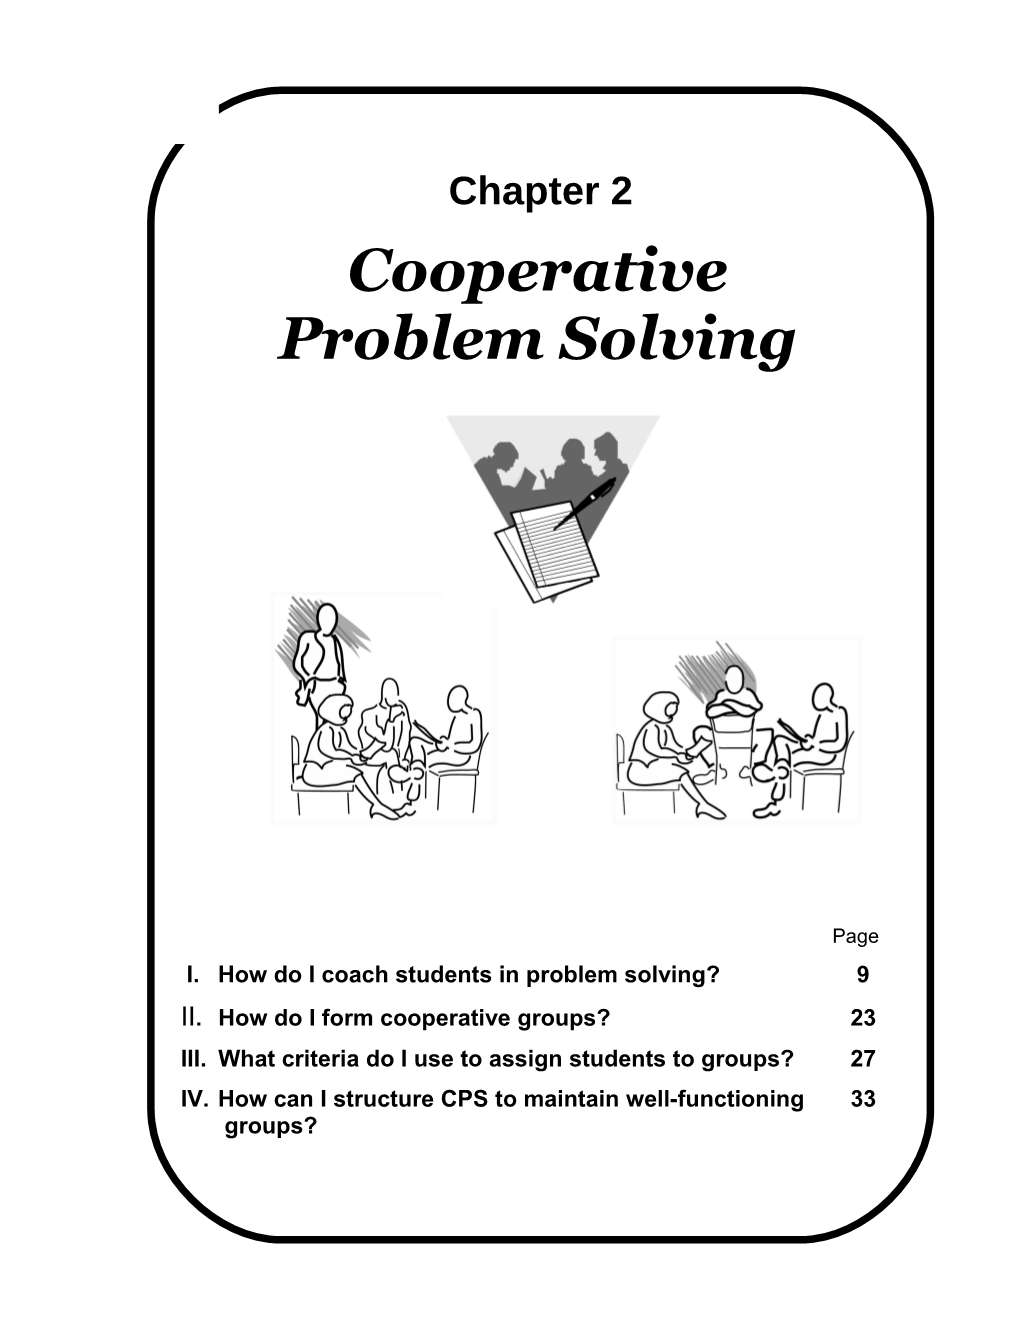 I. How Do I Coach Students in Problem Solving? 9